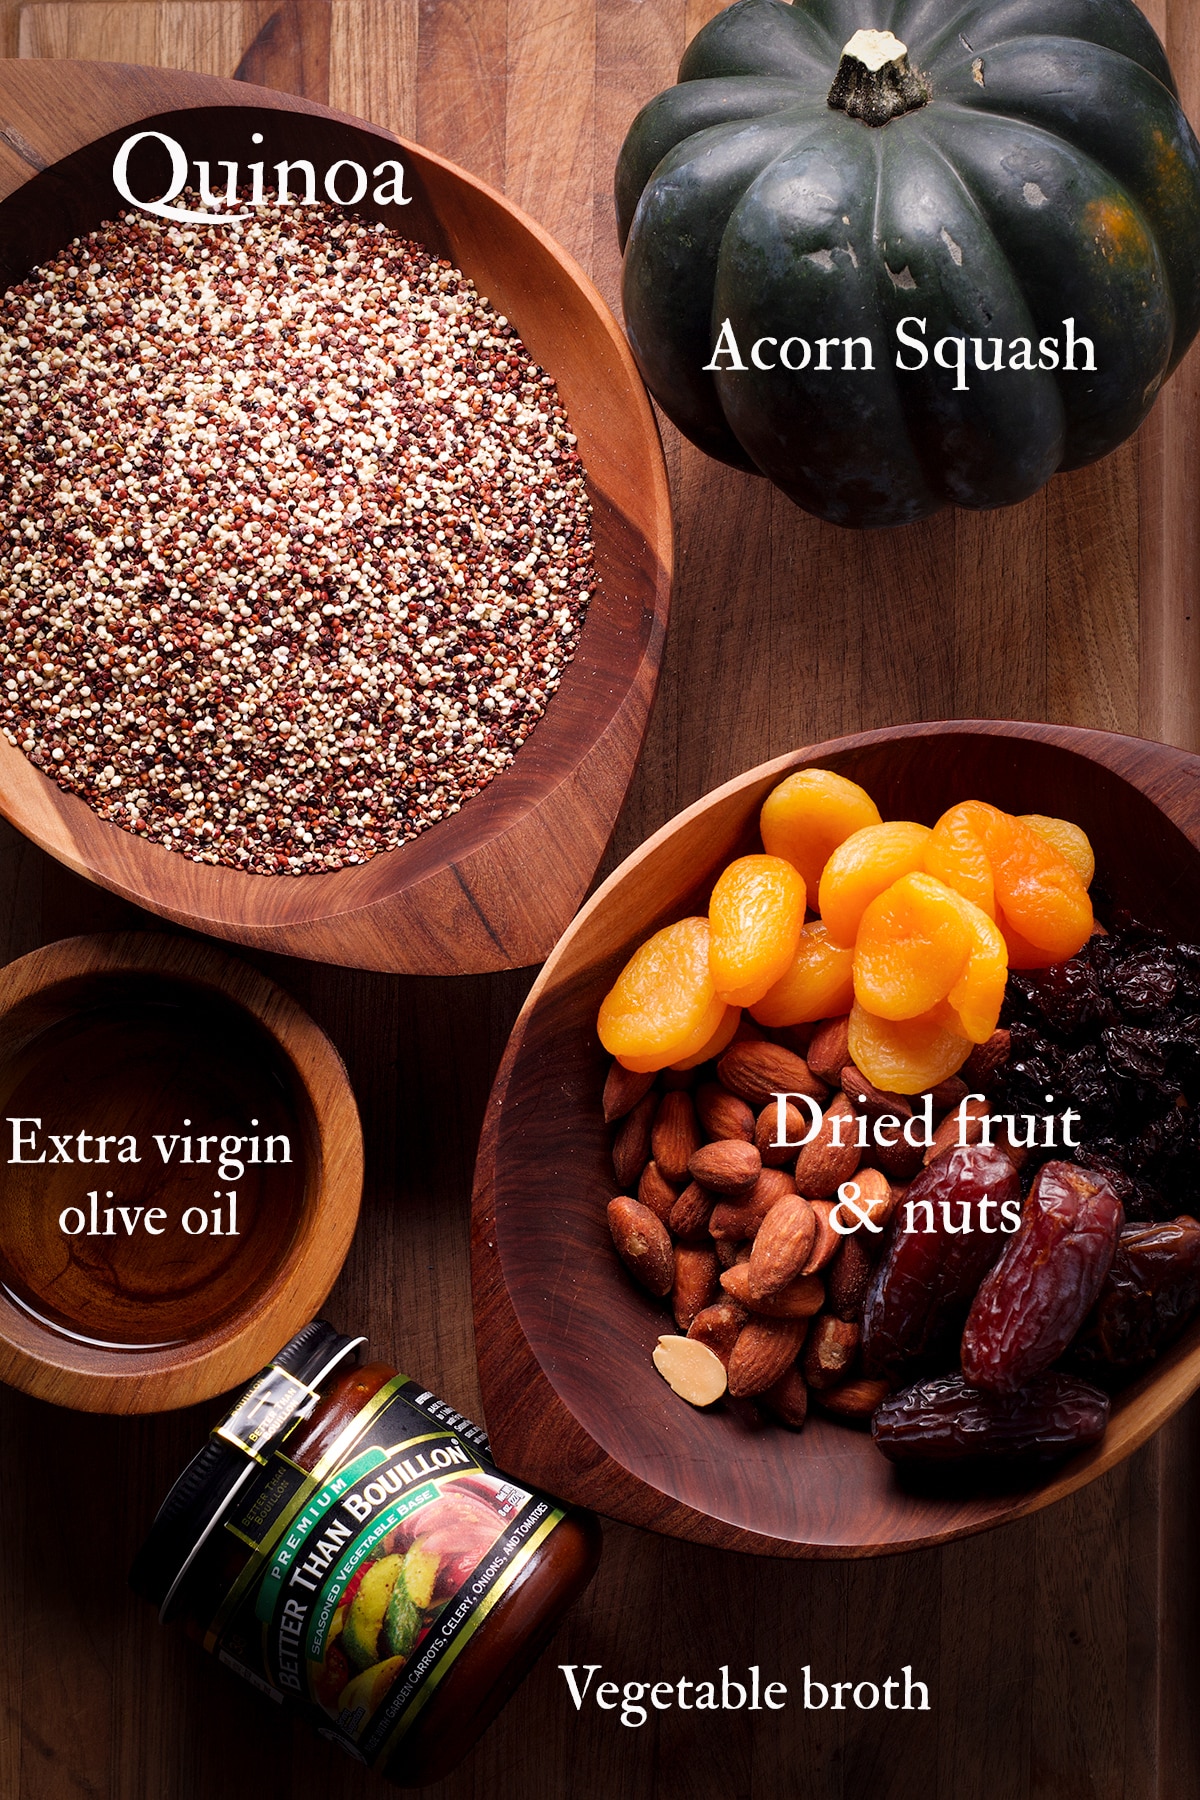 All the ingredients you need to make vegan quinoa stuffed acorn squash displayed on a cutting board.